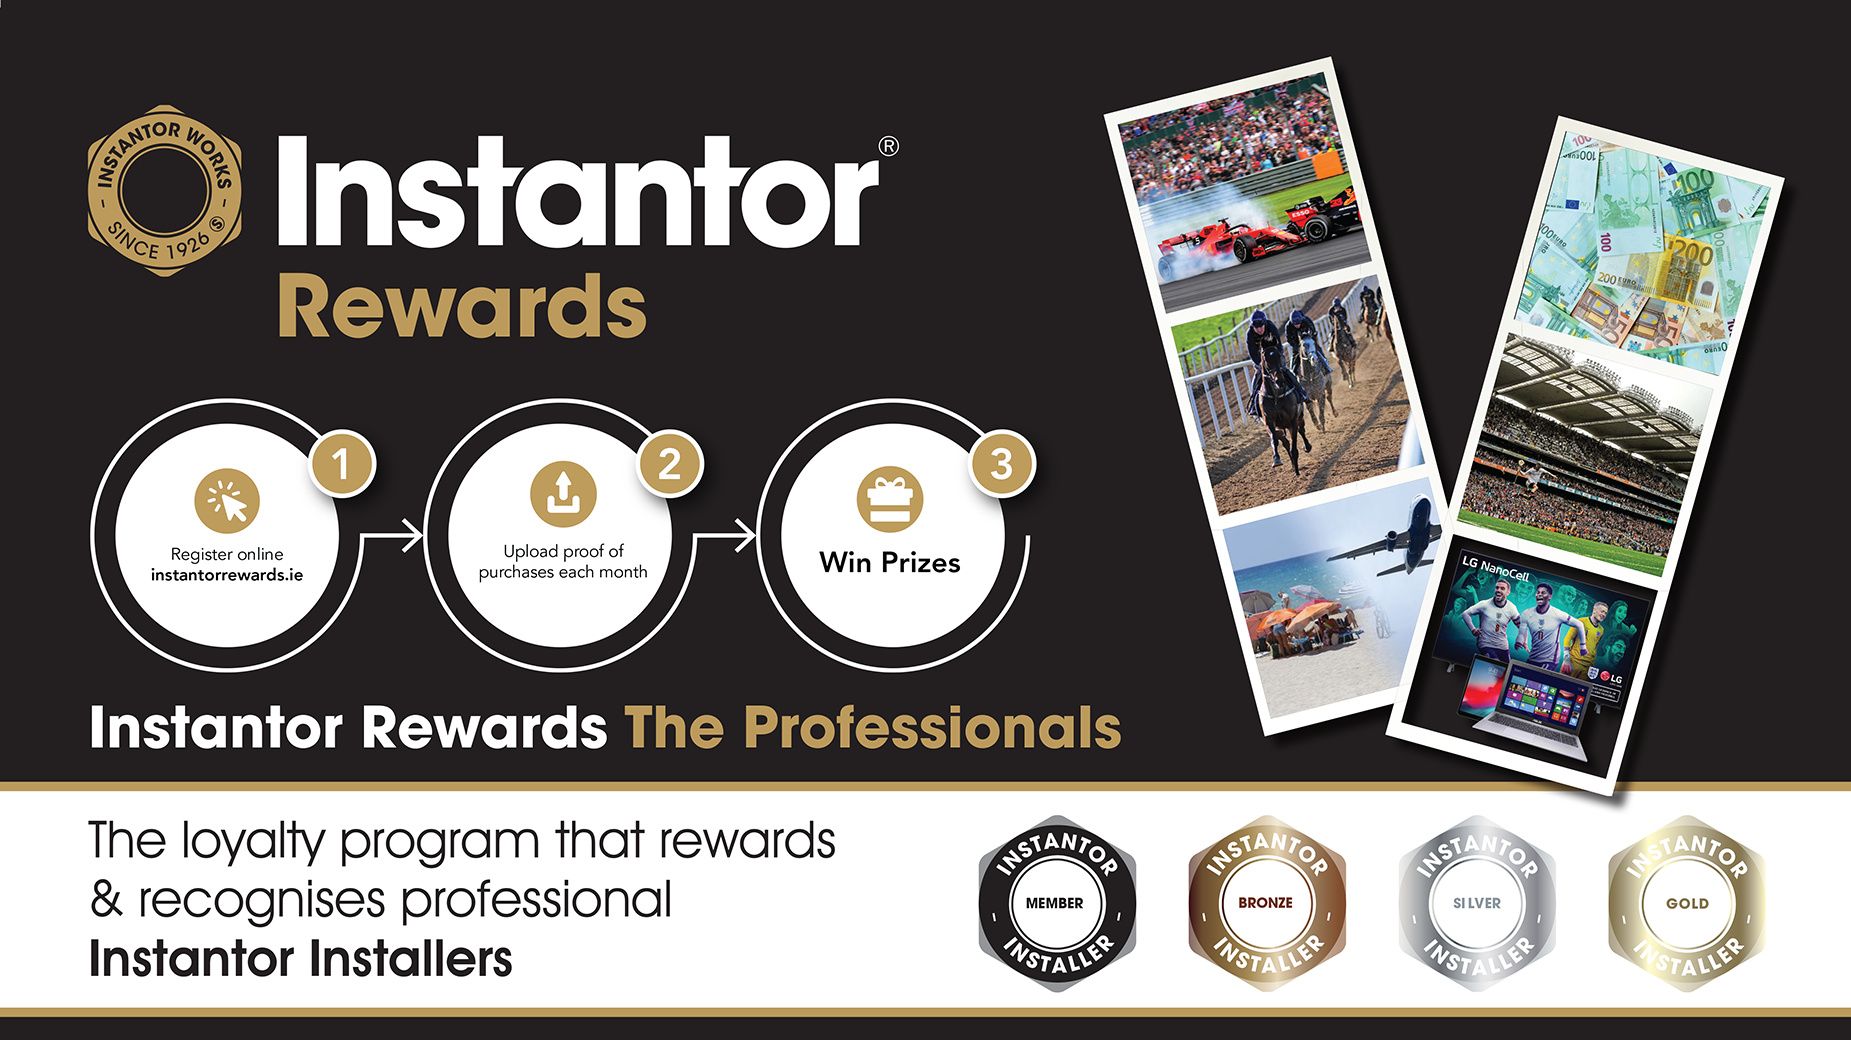 Instantor Rewards poster - the loyalty program that rewards and recognises professional Instantor Installers.